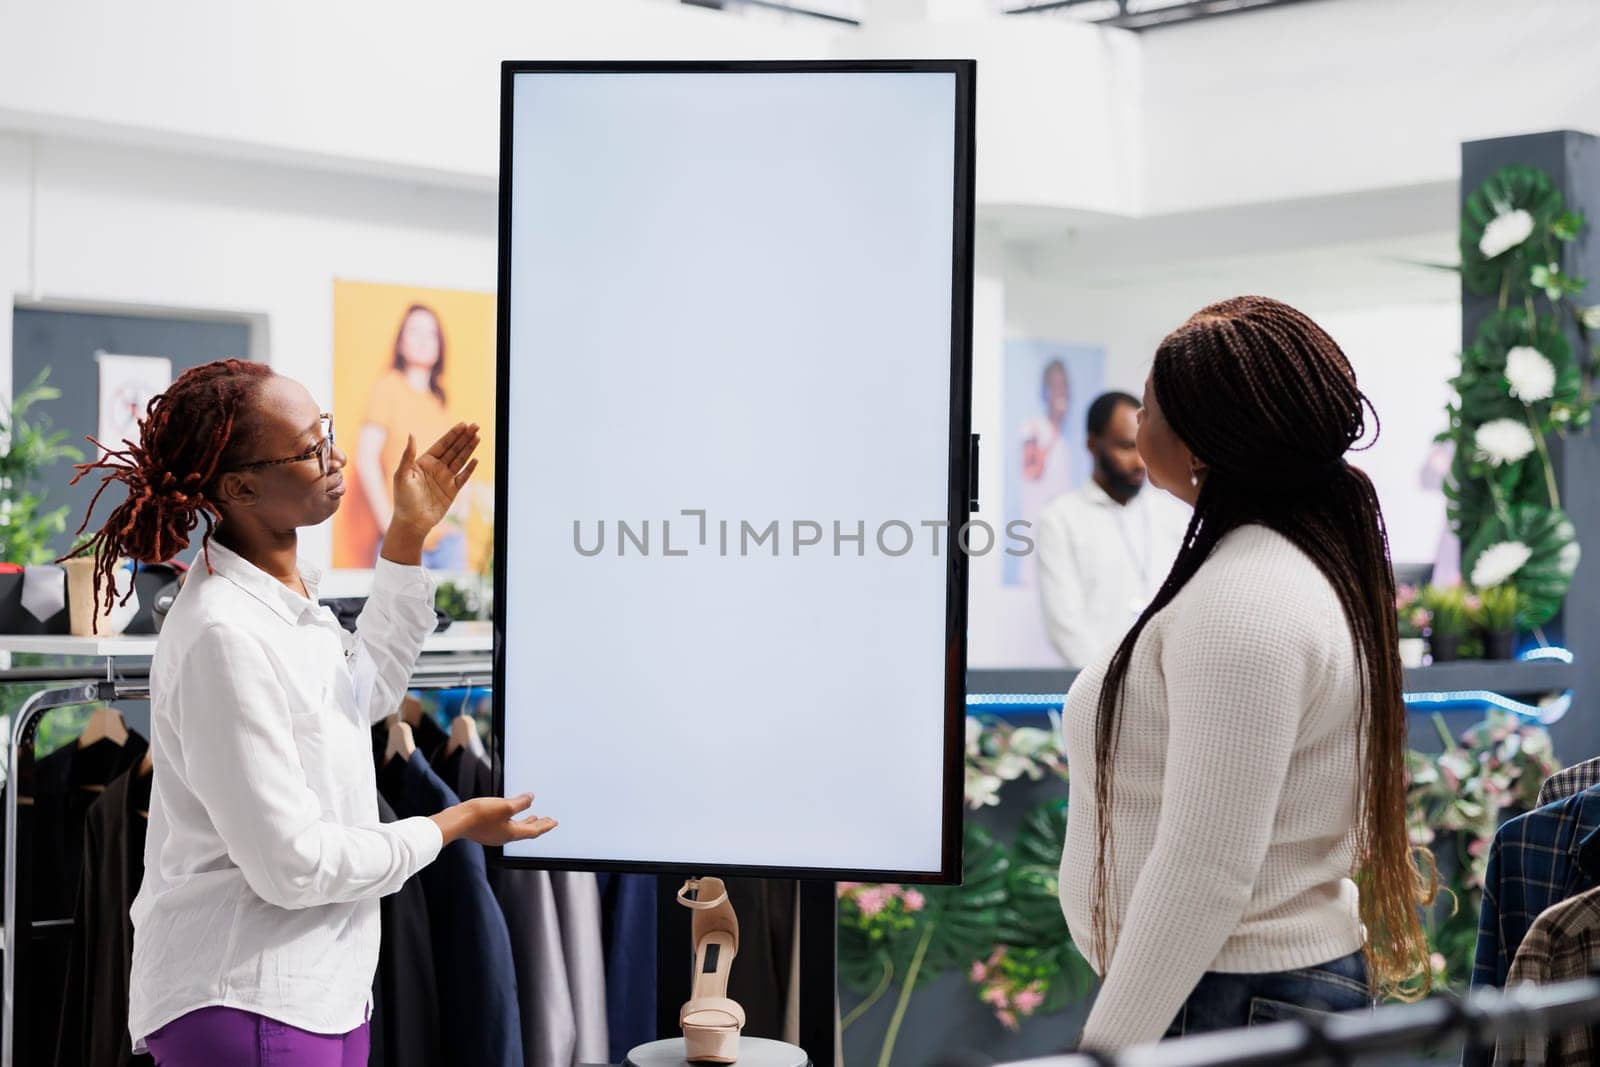 Assistant helping customer choosing shoes, showing style and size options on smart white empty display. Clothing store employee showcasing promotion on blank whiteboard screen mock up